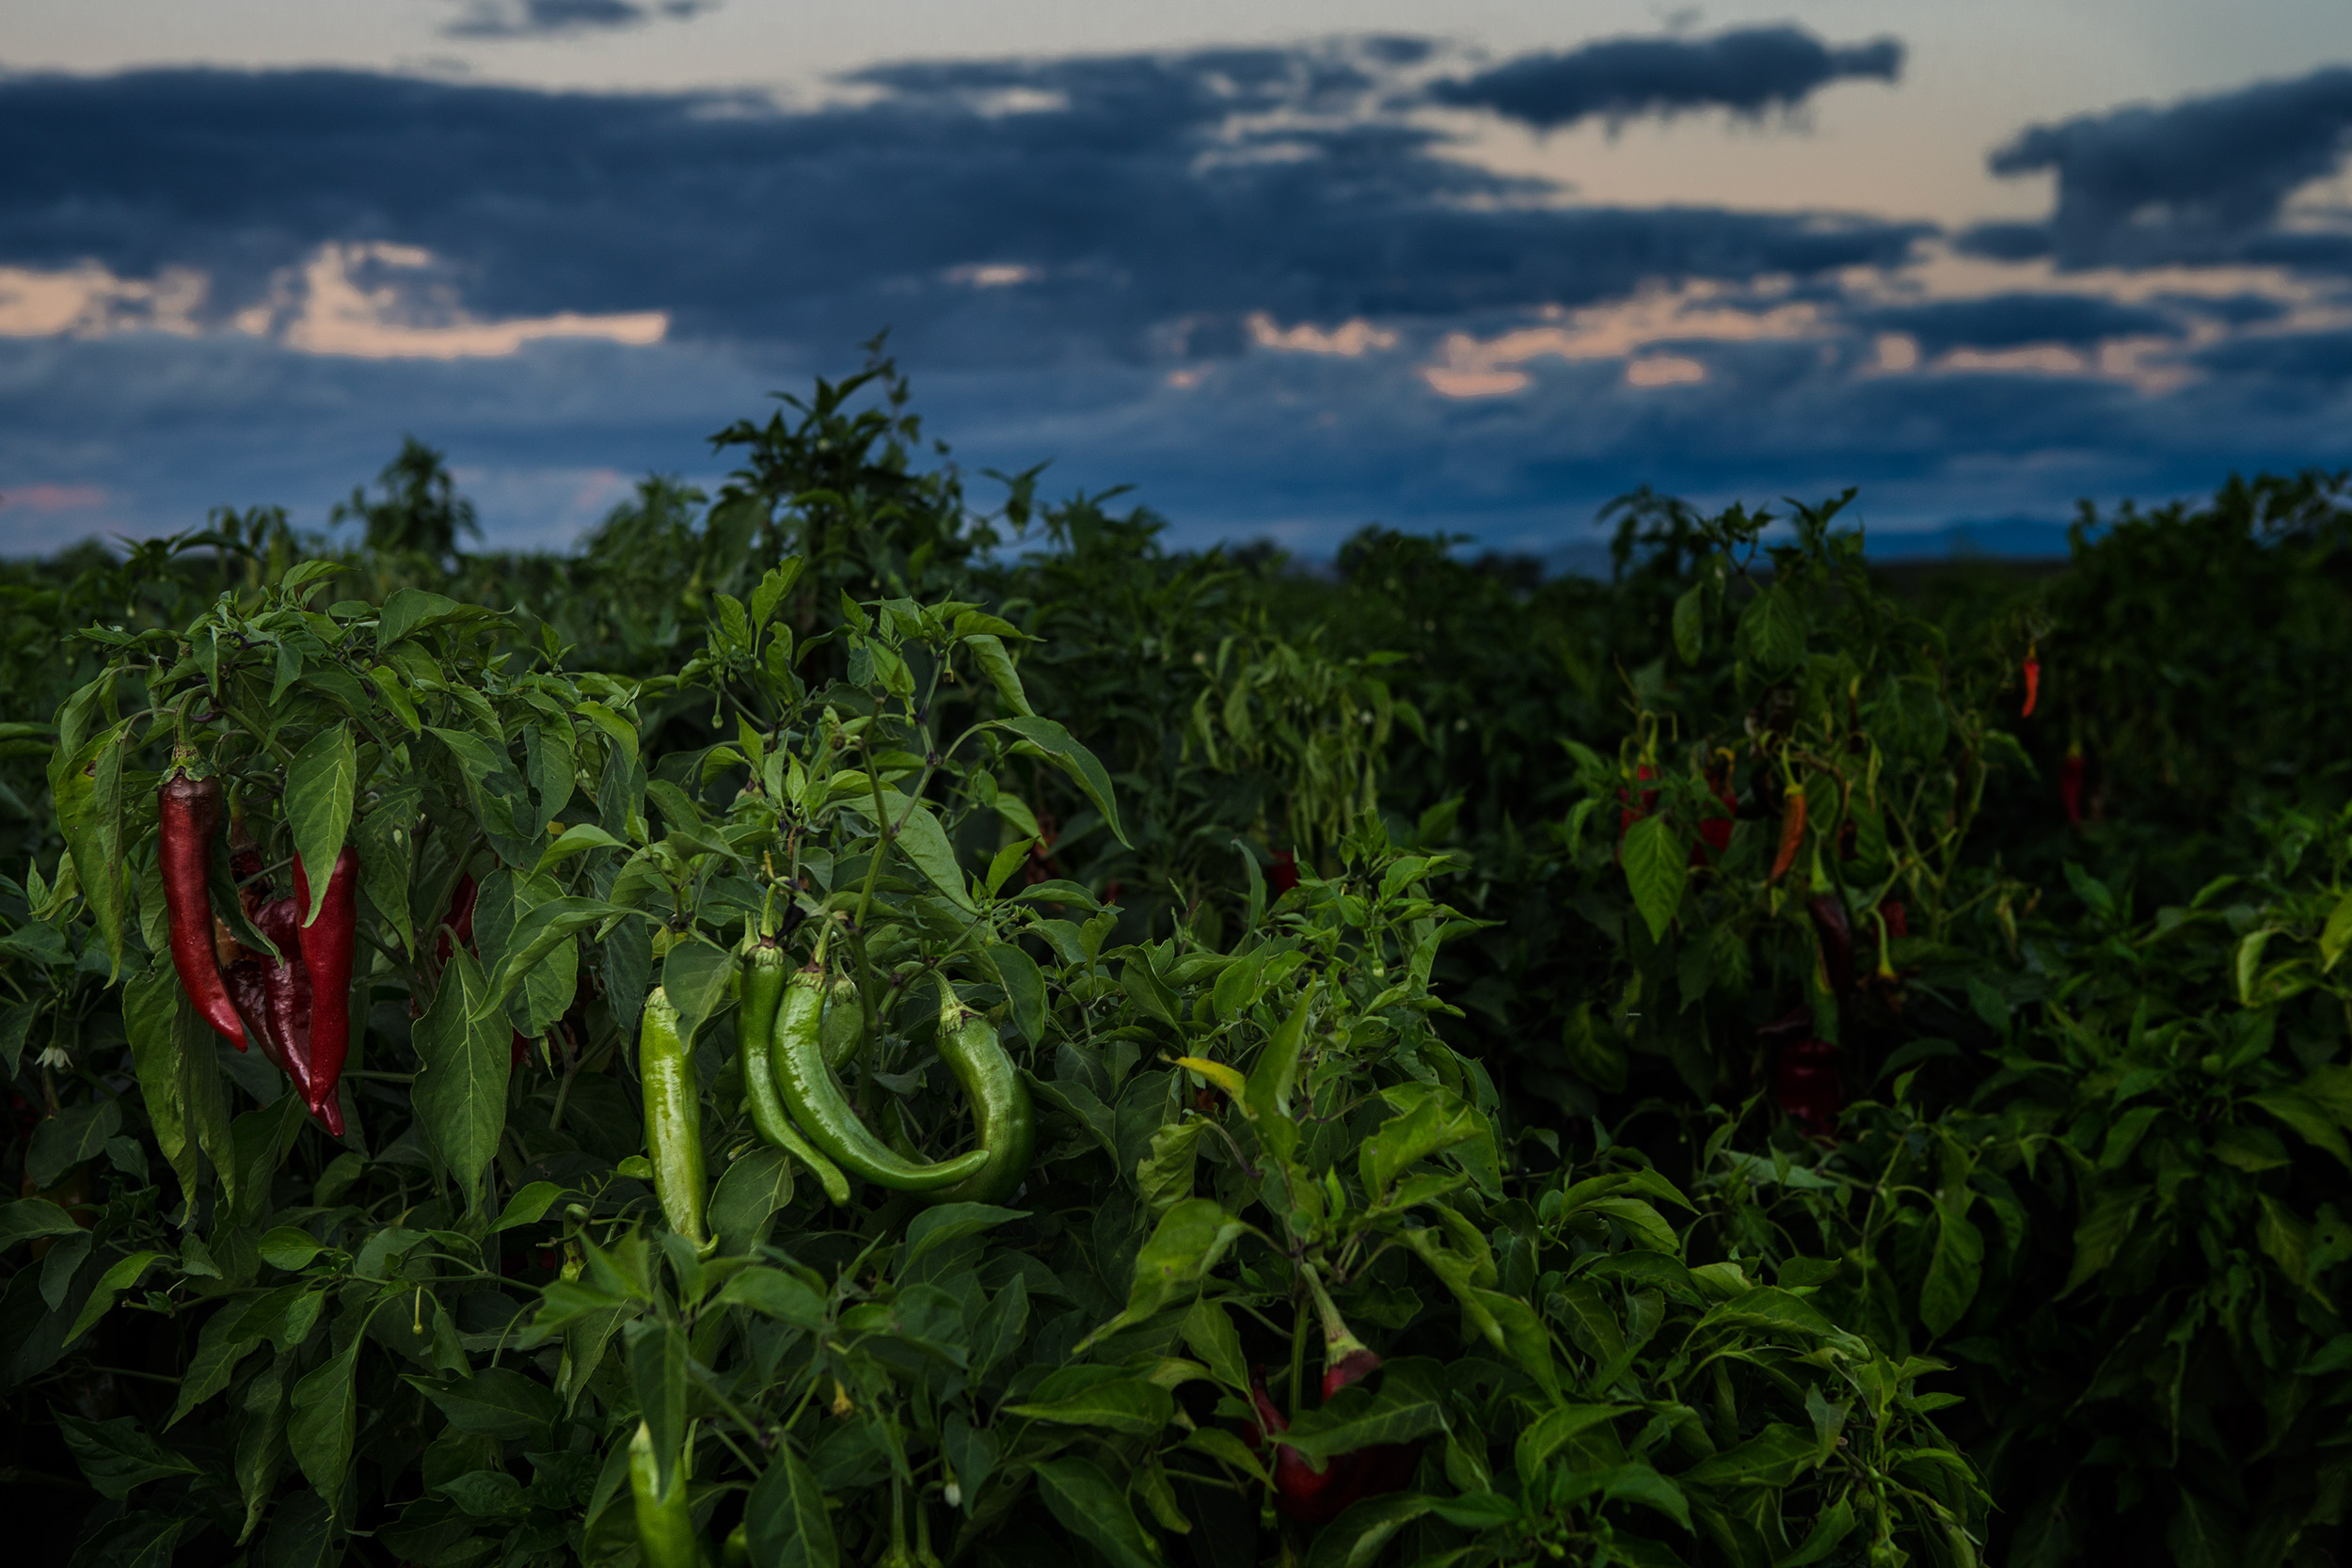 red and green hot chili peppers ready to pick in field. Agriculture photography